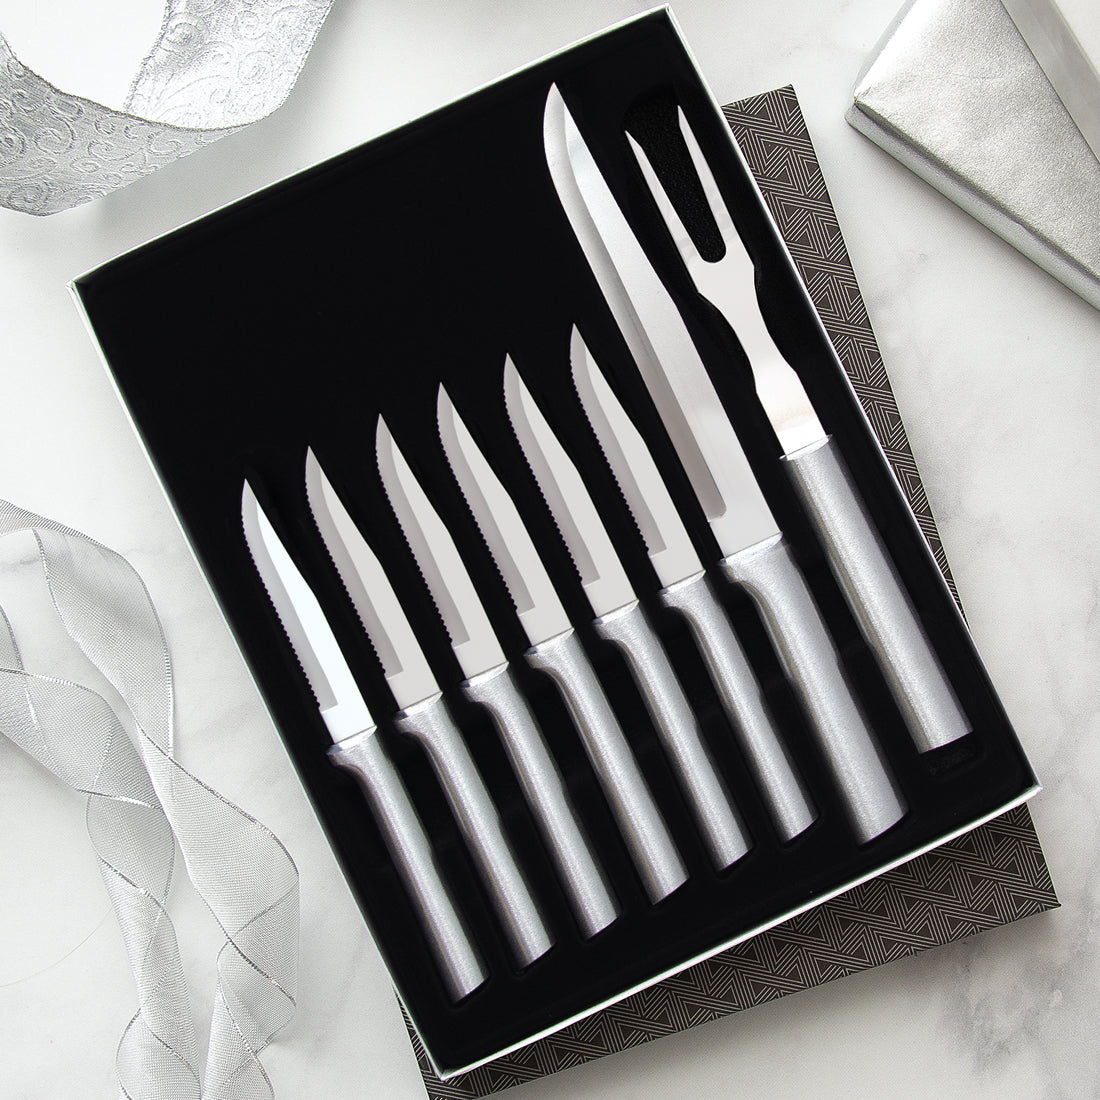 Rada Cutlery - People are constantly SEARCHING FOR the quality and  dependability of USA-made products. Your group can provide them through a Rada  Cutlery Fundraiser!